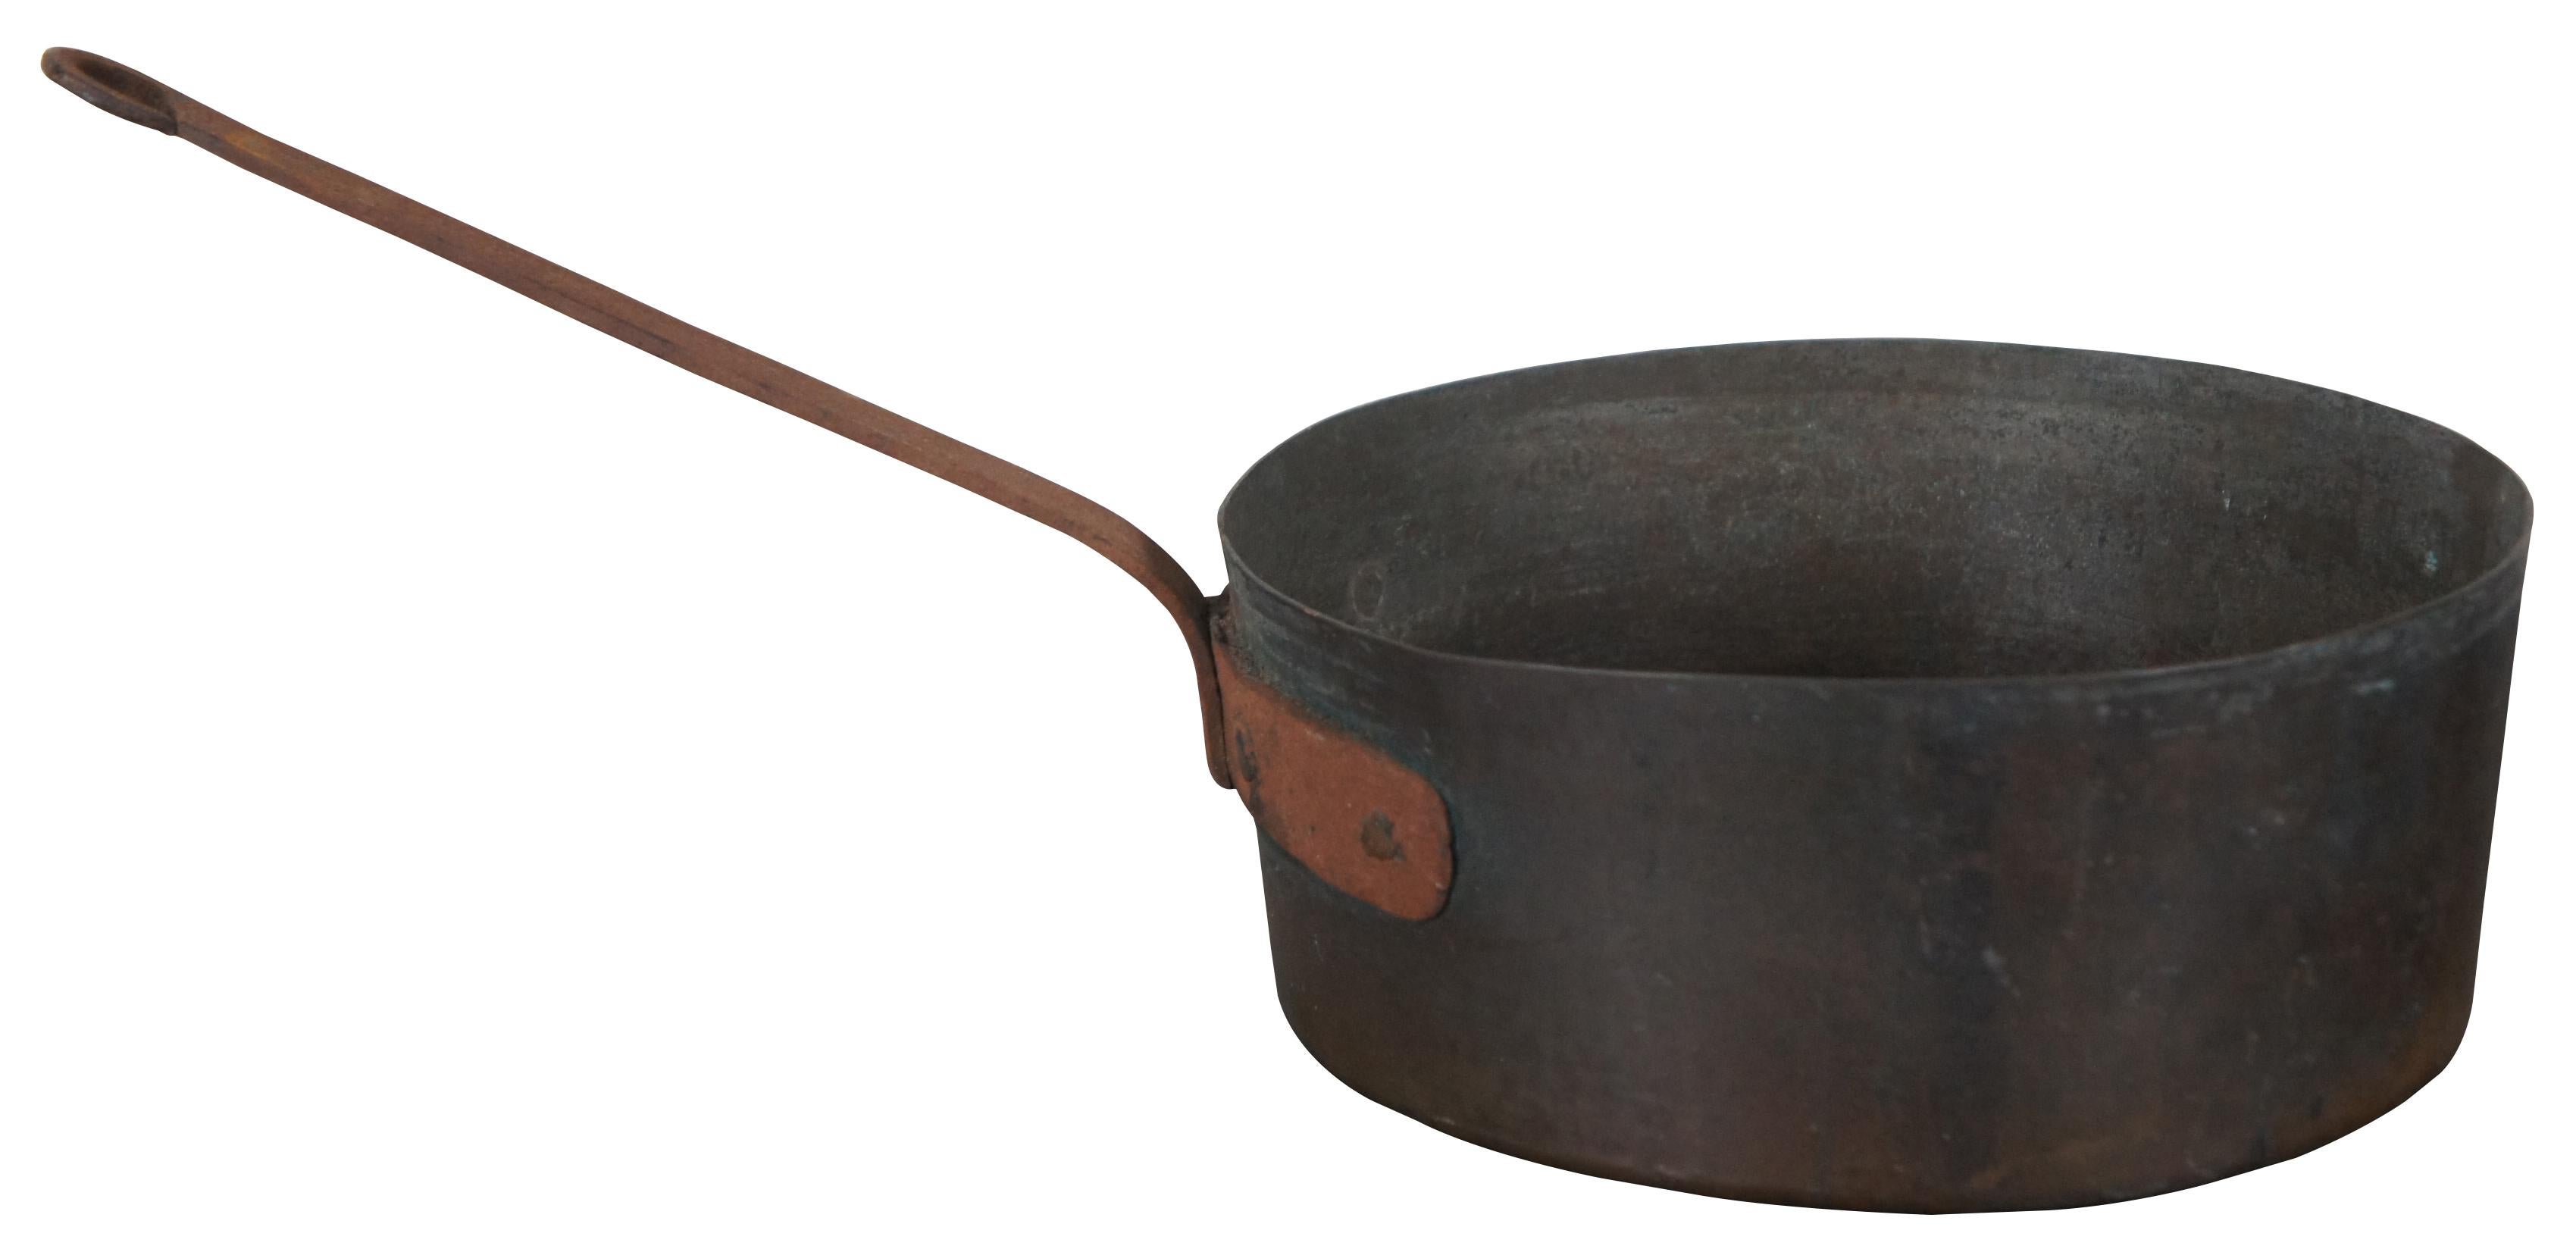 Antique copper sauce pan with cast iron handle, stamped “V.H.M.” on the side; capacity approximately 5 quarts.

Measures: 18” x 9.5” x 4.25” / handle height – 7.25” (Width x depth x height).
  